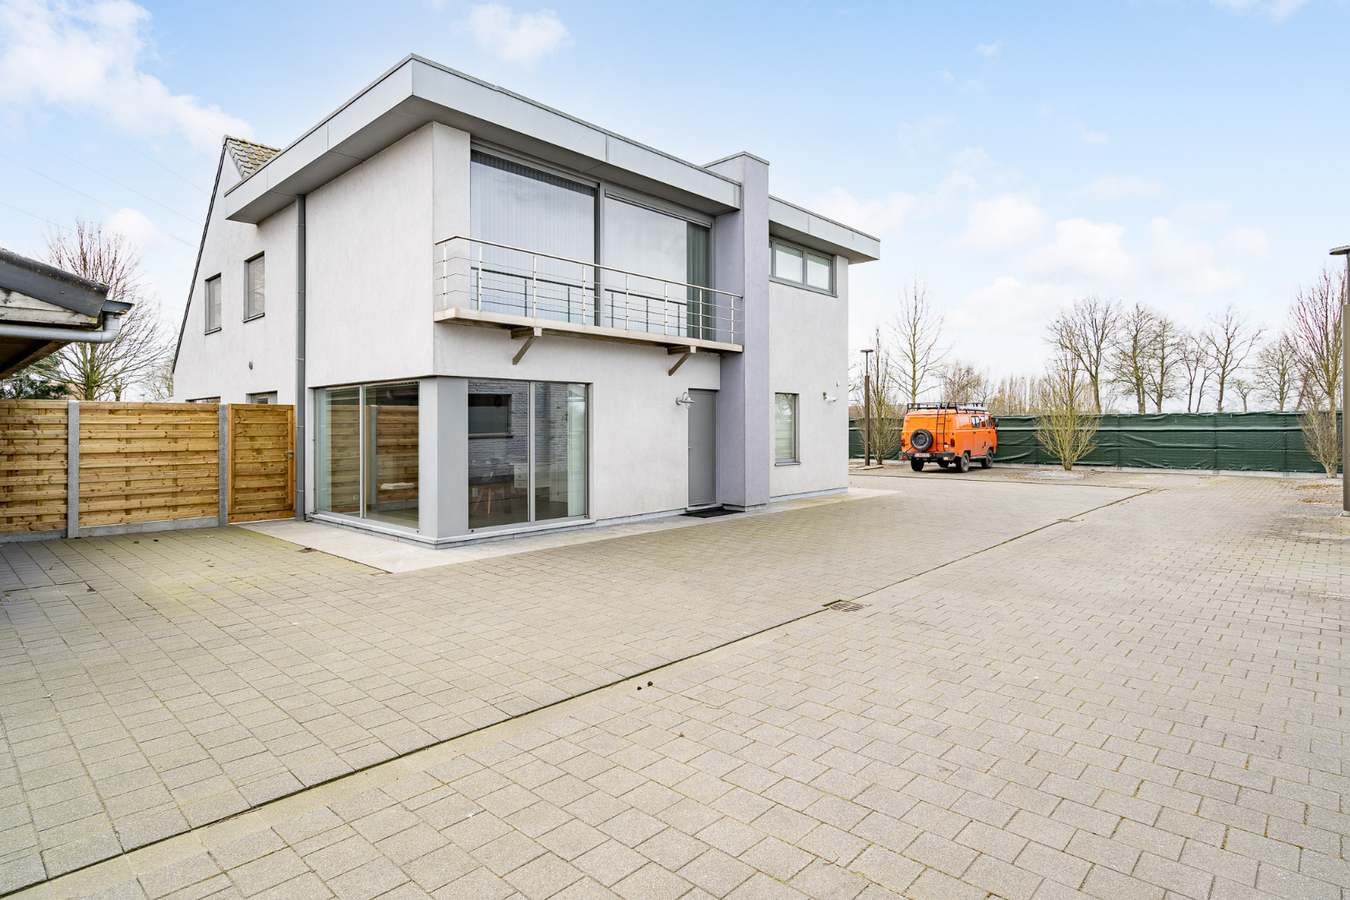 Property for sale |  with option - with restrictions in Zedelgem